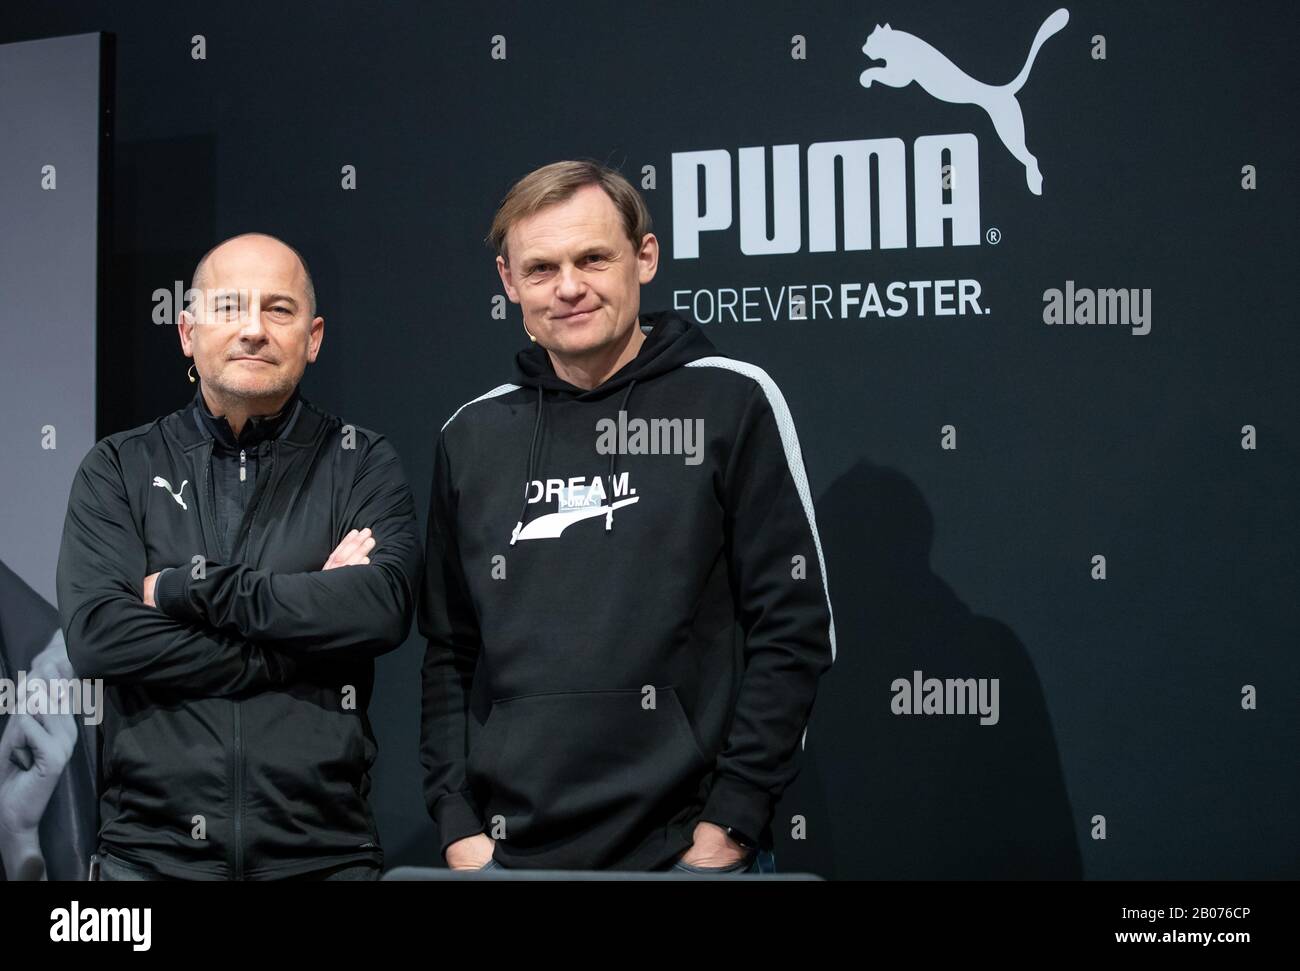 19 February 2020, Bavaria, Herzogenaurach: Björn Gulden (r), Chairman and  Managing Director of the sporting goods manufacturer Puma SE, and Michael  Lämmermann, Puma's CFO, are standing in front of the company logo